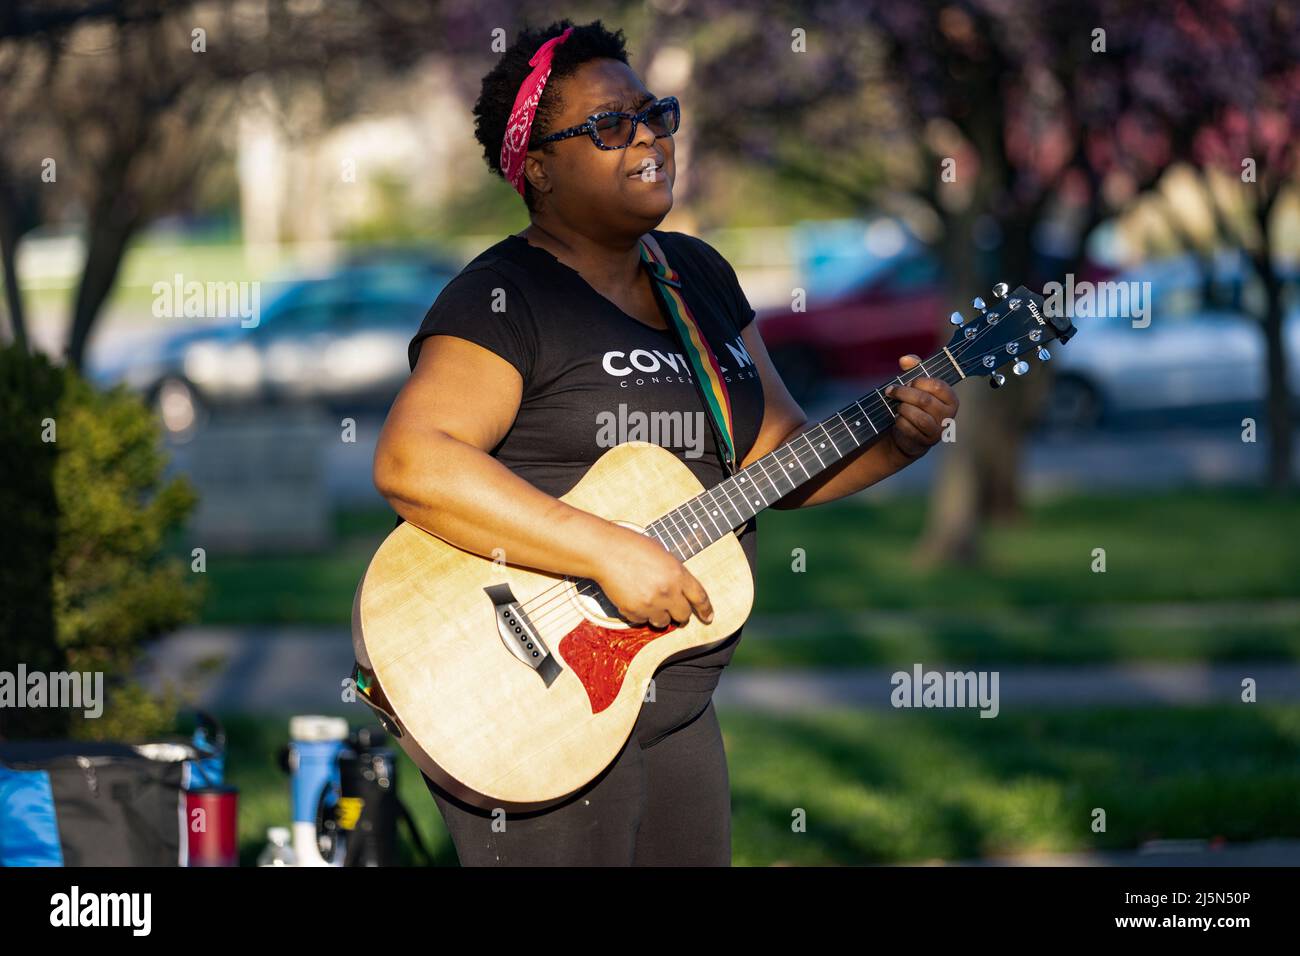 Paisha Thomas, a musical artist, sings and plays original songs on guitar at the Community Vigil of Ma'Khia Bryant marking one year since Ma'Khia Bryant was shot and killed by Columbus Police. A candlelight vigil and memorial was held for Ma'Khia Bryant at Mayme Moore Park in Columbus, Ohio one year after Bryant was shot and killed by Columbus Police at the age of 16 years old on Saturday April 23, 2022. Ma'Khia Bryant's sisters Azariah Bryant, 14, and Ja'Niah Bryant, 16, appeared along with their grandmother, Jeanene Hammonds, and their aunt, Myra Duke. Stock Photo